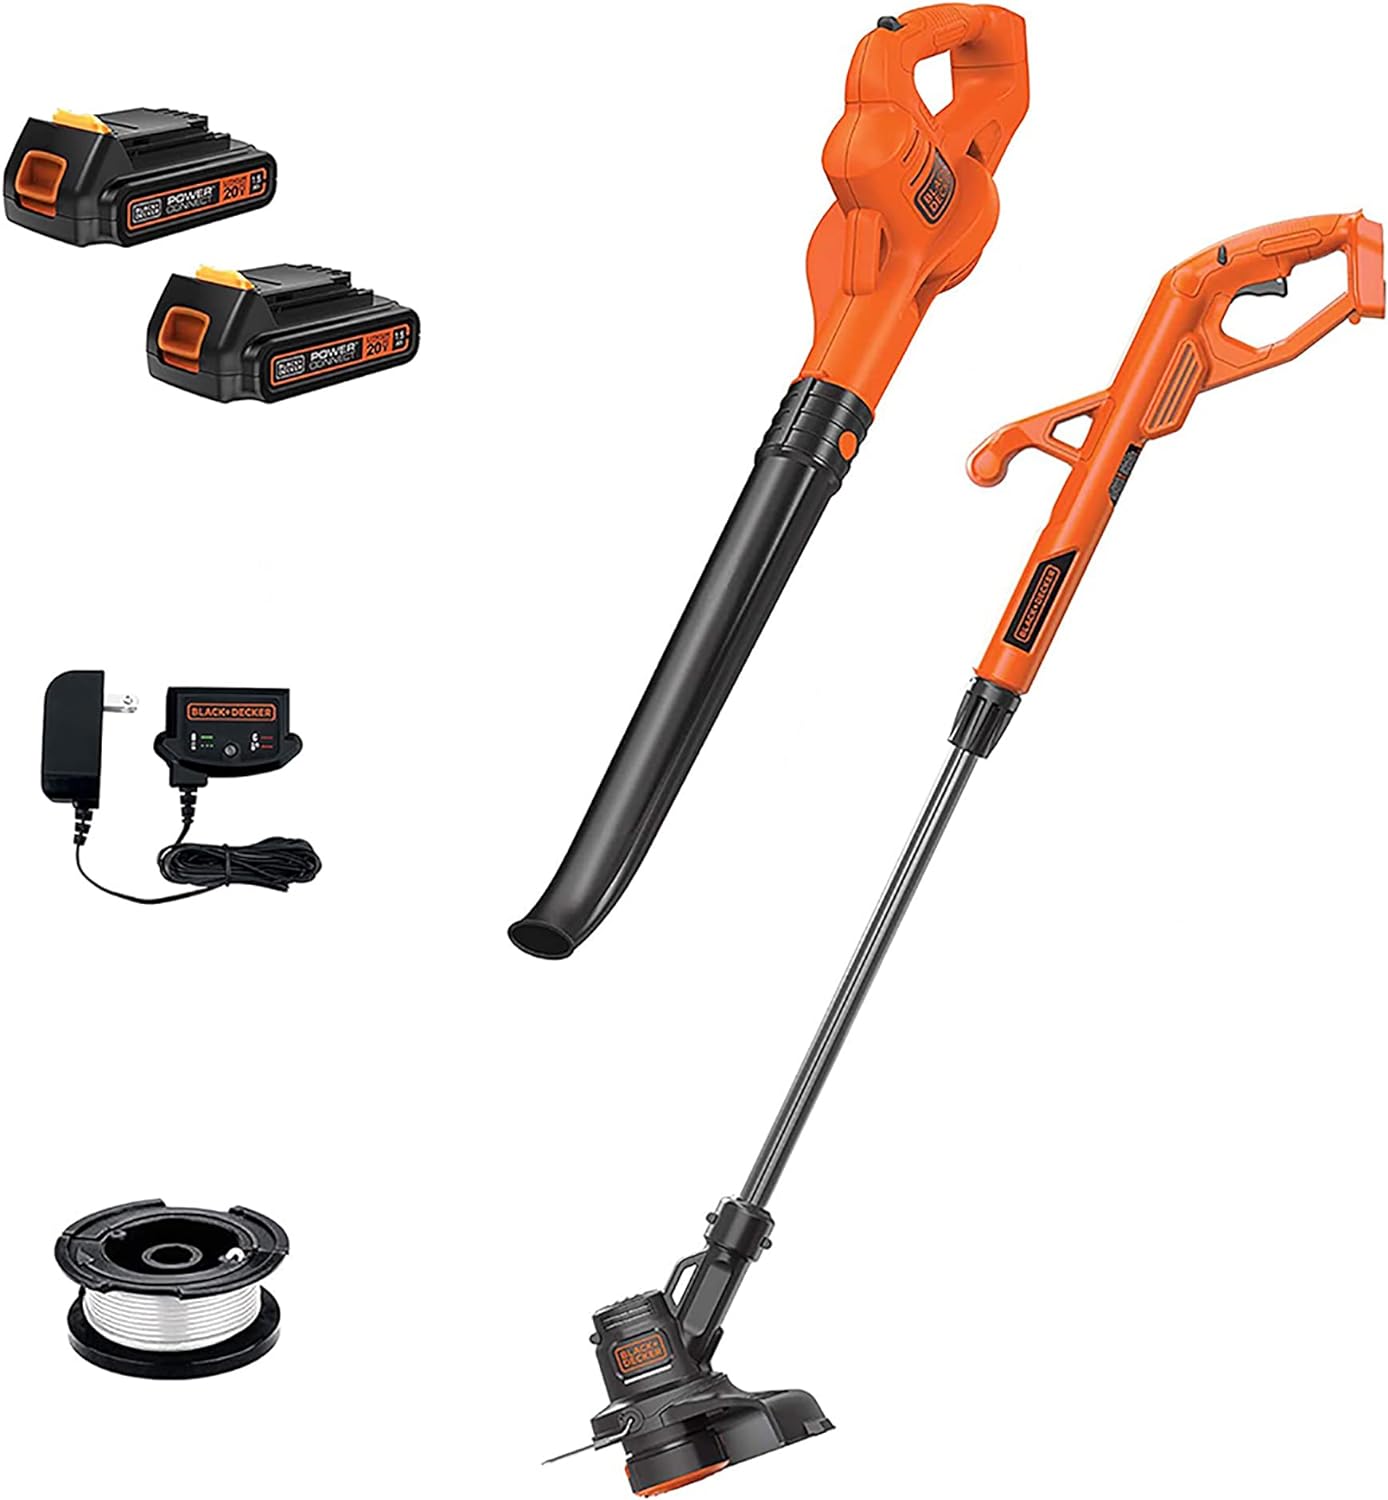 BLACK+DECKER 20V MAX POWERCONNECT 10 in. 2in1 Cordless String Trimmer/Edger + Sweeper Combo Kit